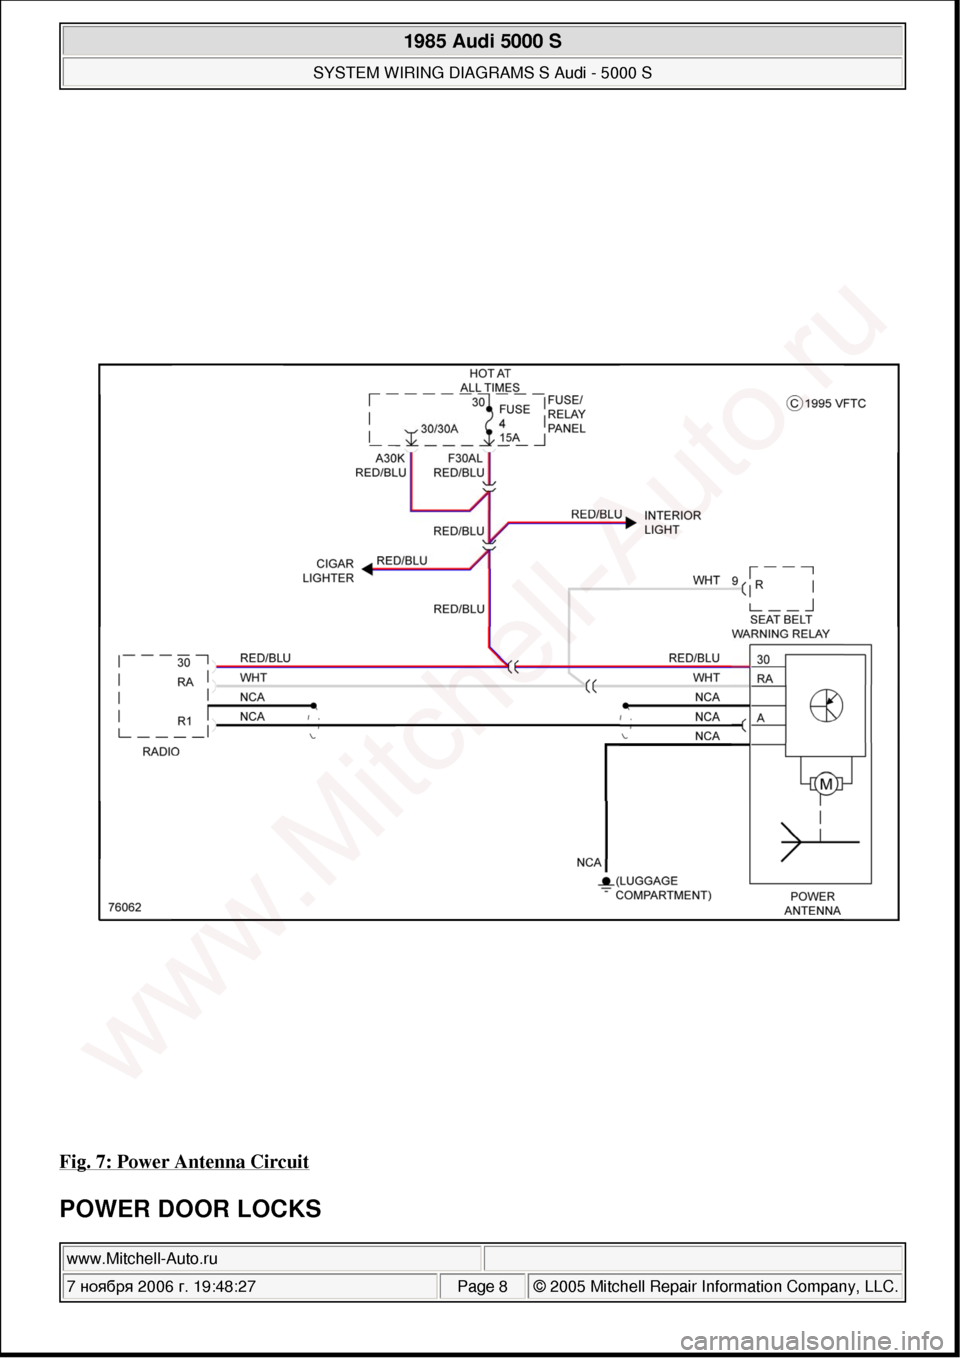 AUDI 5000S 1985 C2 System Wiring Diagram 
Fig. 7: Power Antenna Circuit 
POWER DOOR LOCKS 
 
1985 Audi 5000 S 
SYSTEM WIRING DIAGRAMS S Audi - 5000 S  
www.Mitchell-Auto.ru  
7 ноября  2006 г. 19:48:27Page 8 © 2005 Mitchell Repair In